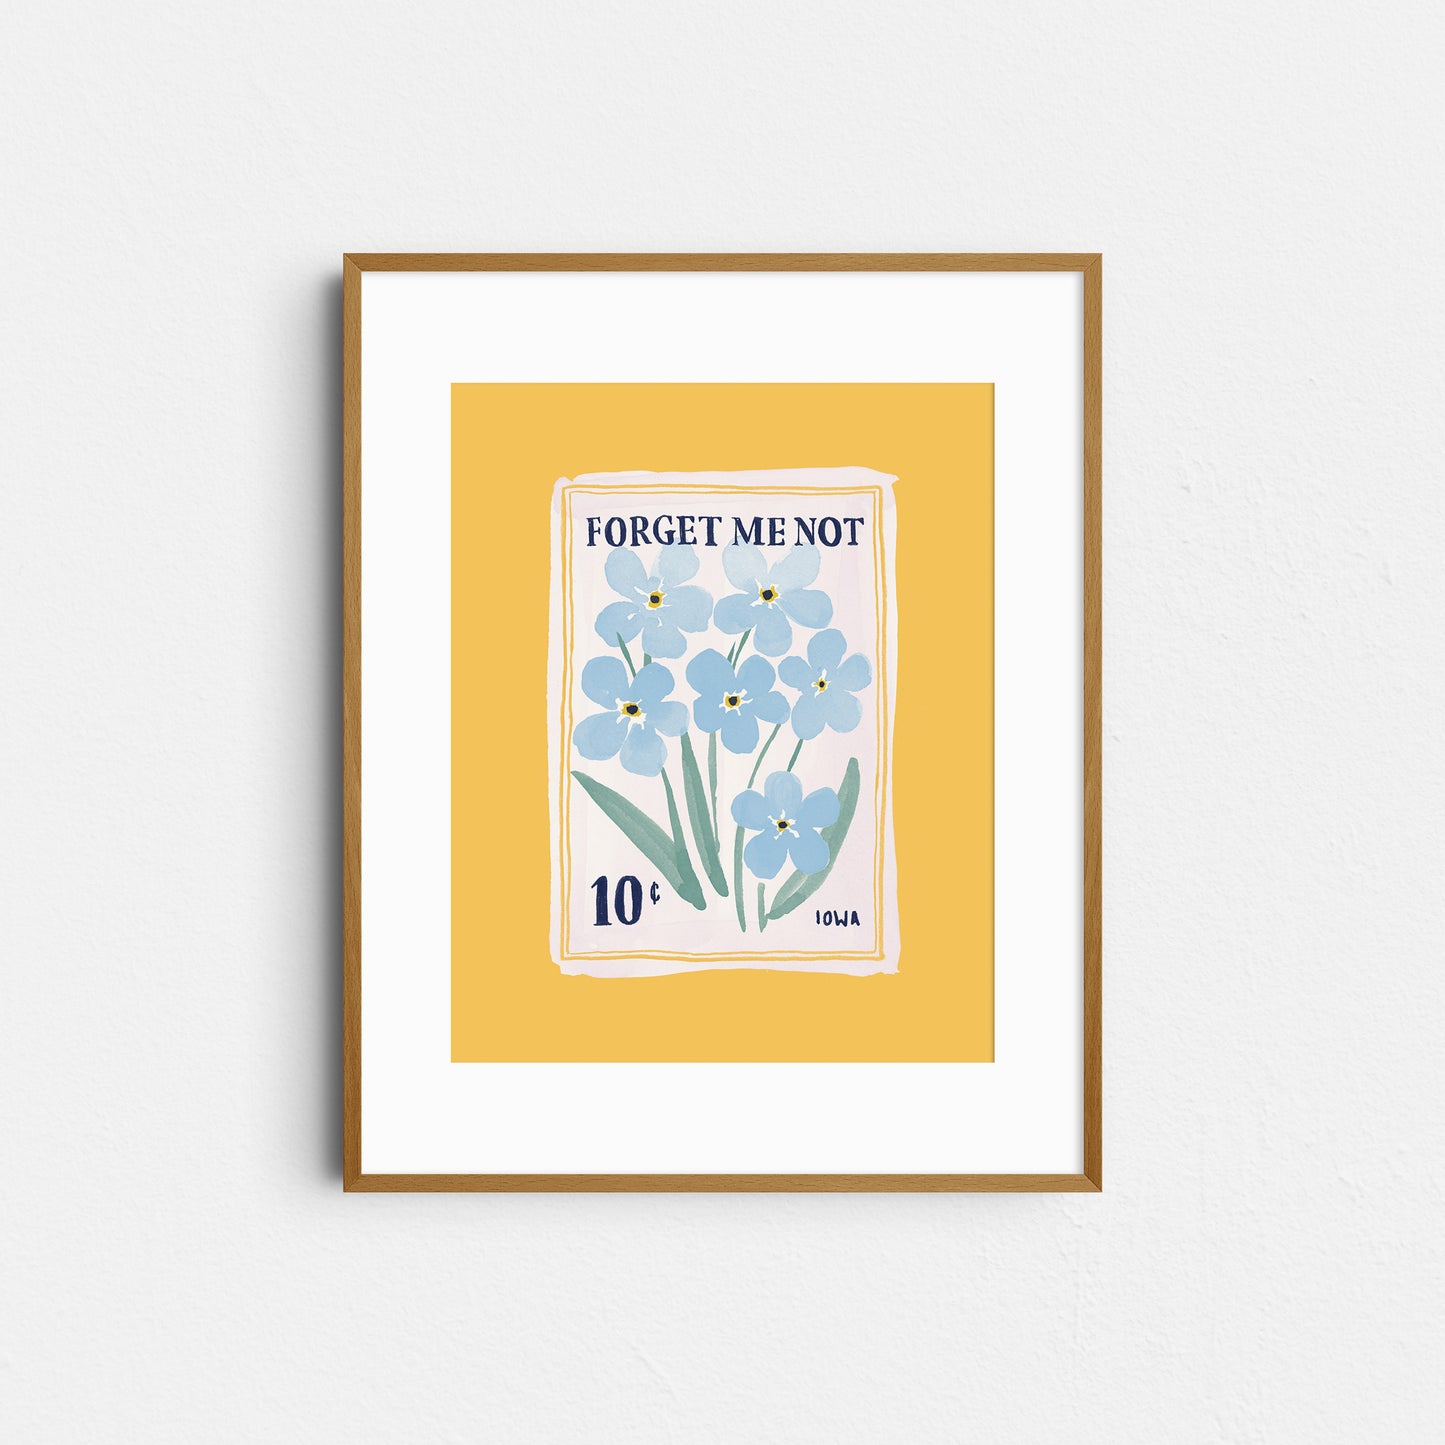 8 x 10 Forget Me Not Art Print